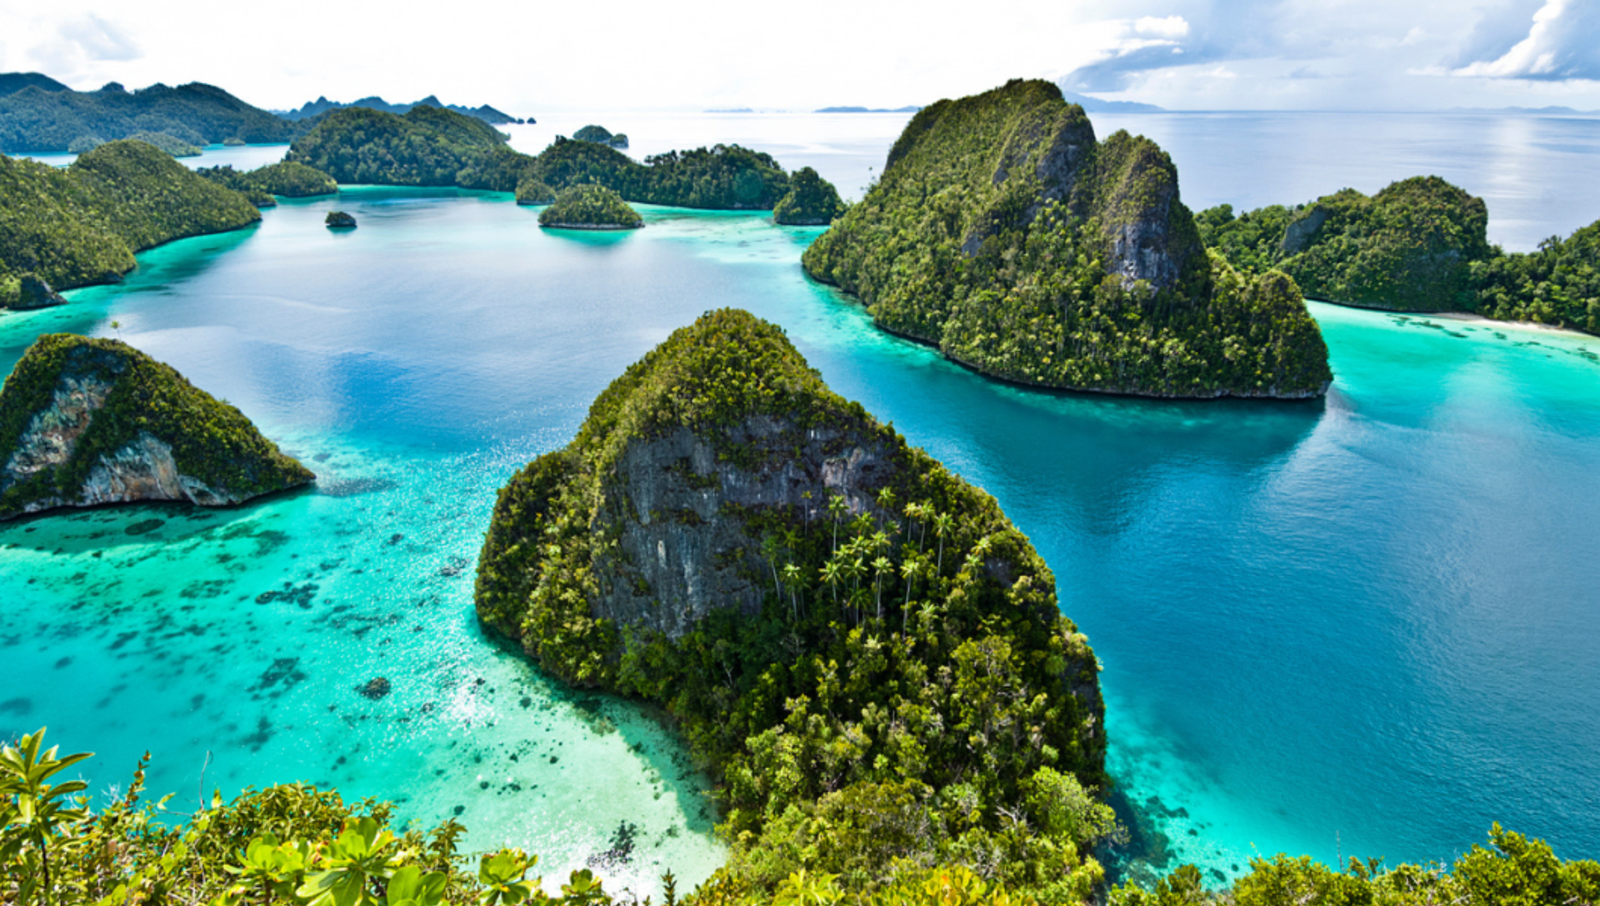 A group of tall, small islands covered in trees and surrounded by bright, blue water